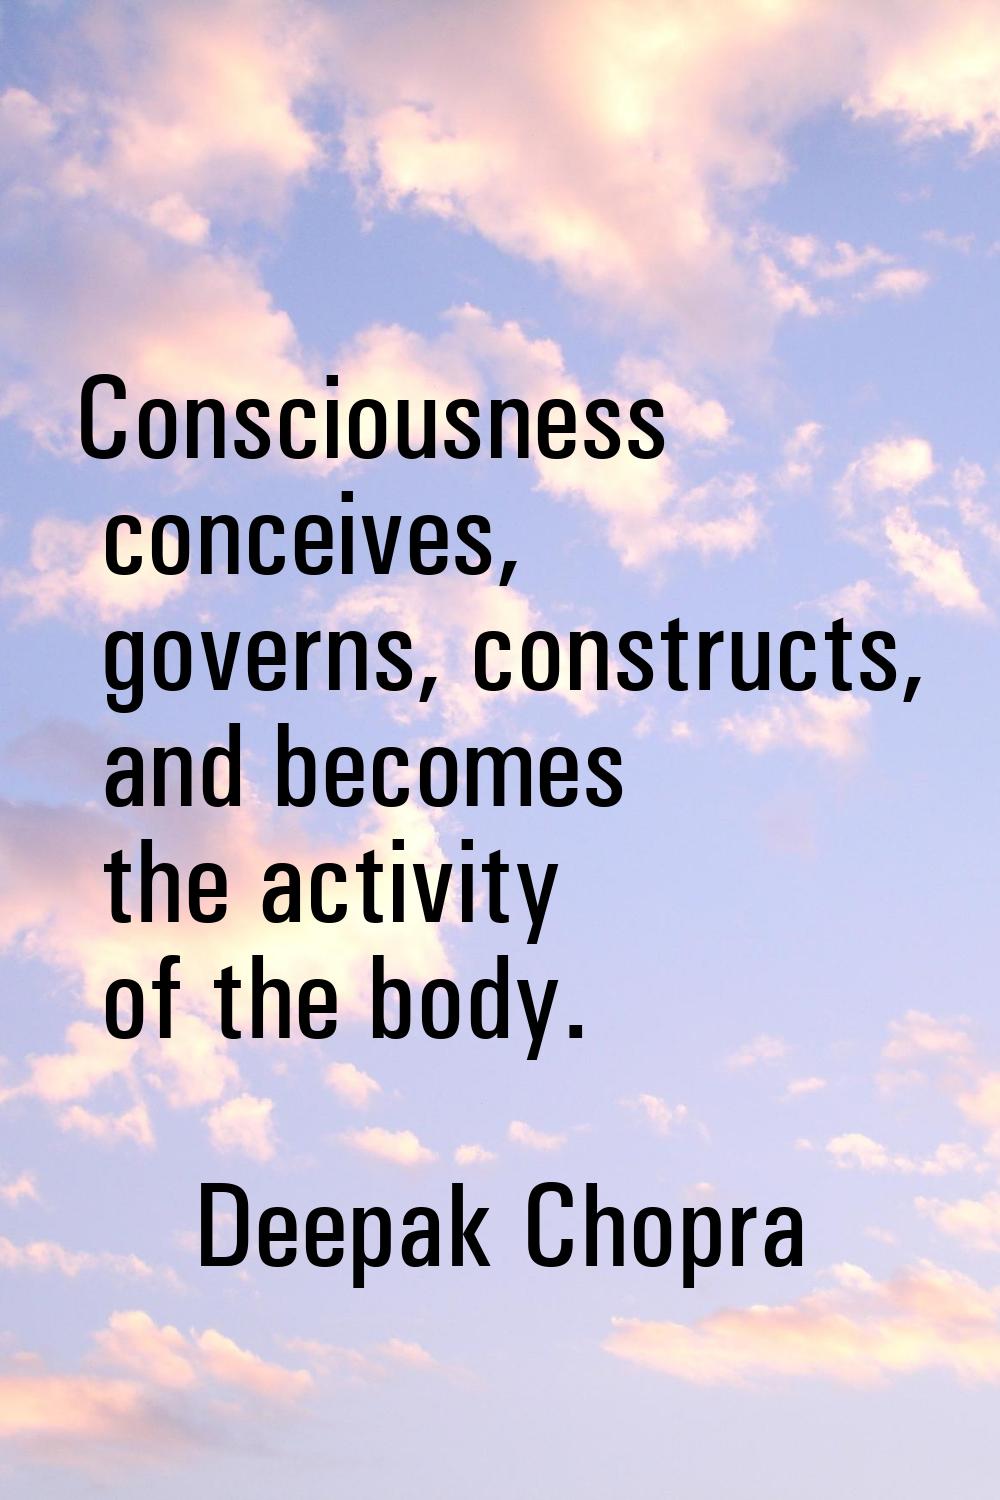 Consciousness conceives, governs, constructs, and becomes the activity of the body.